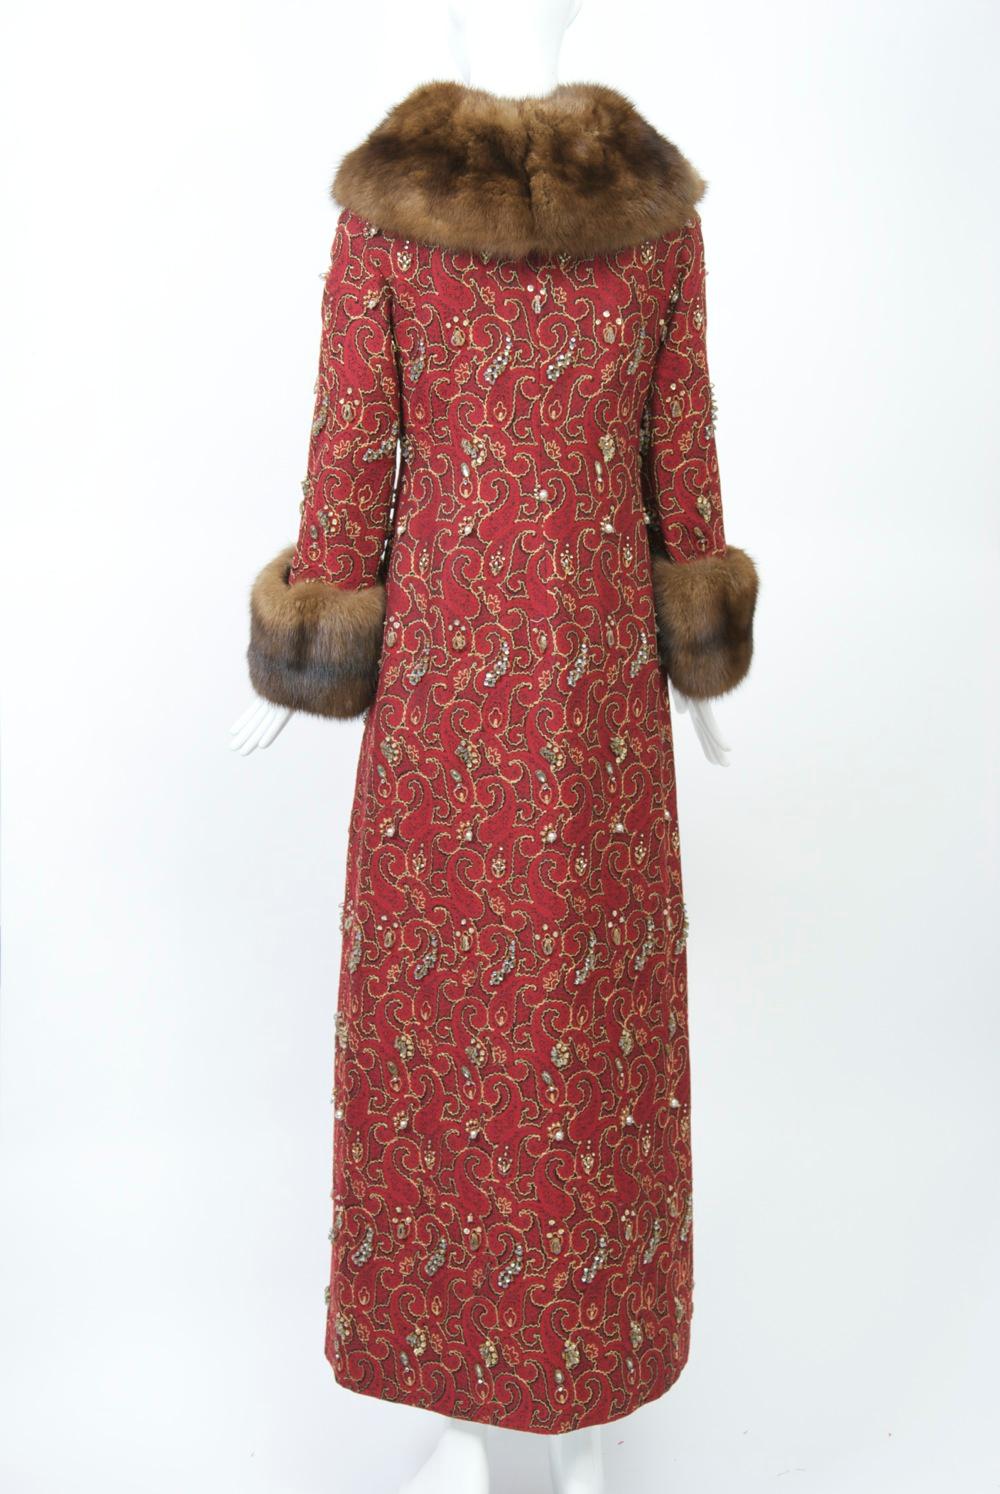 Beaded Red Brocade Evening Coat with Sable Trim 1